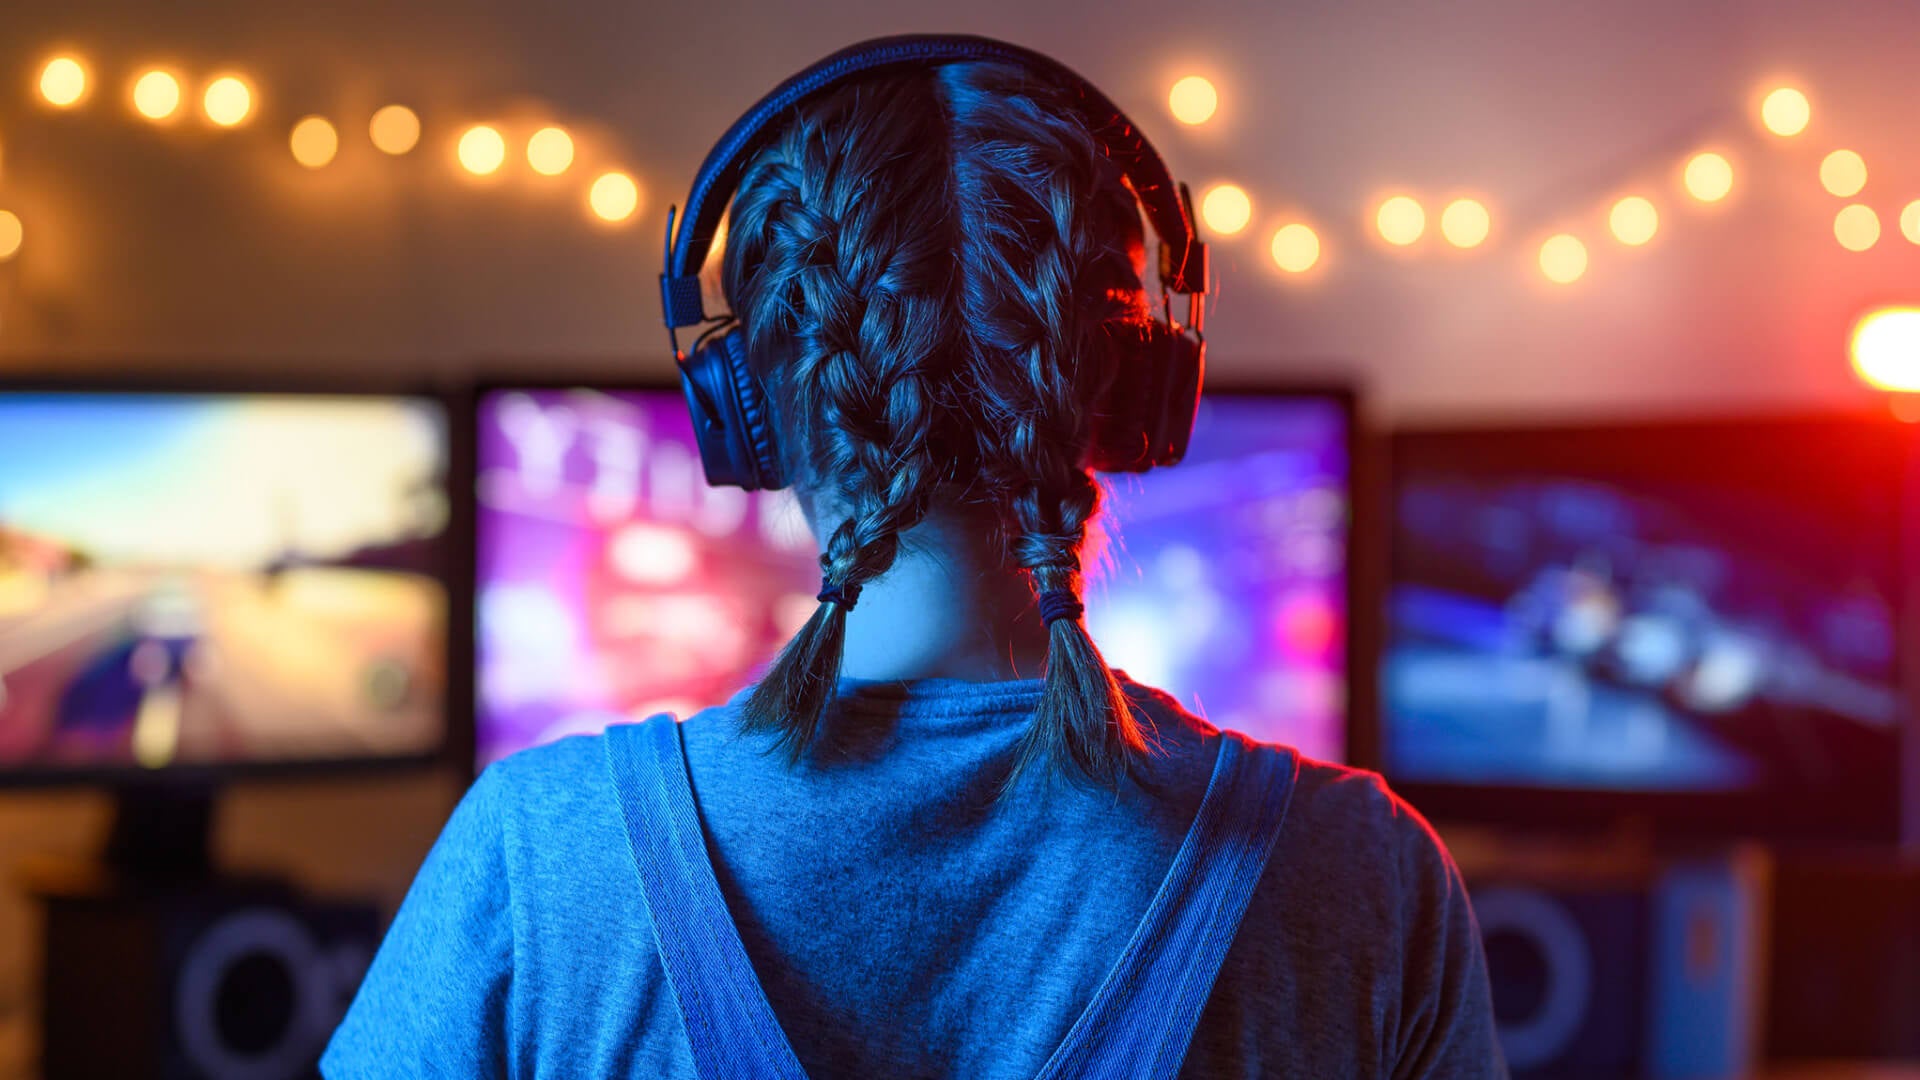 Tips to keep a good posture while gaming